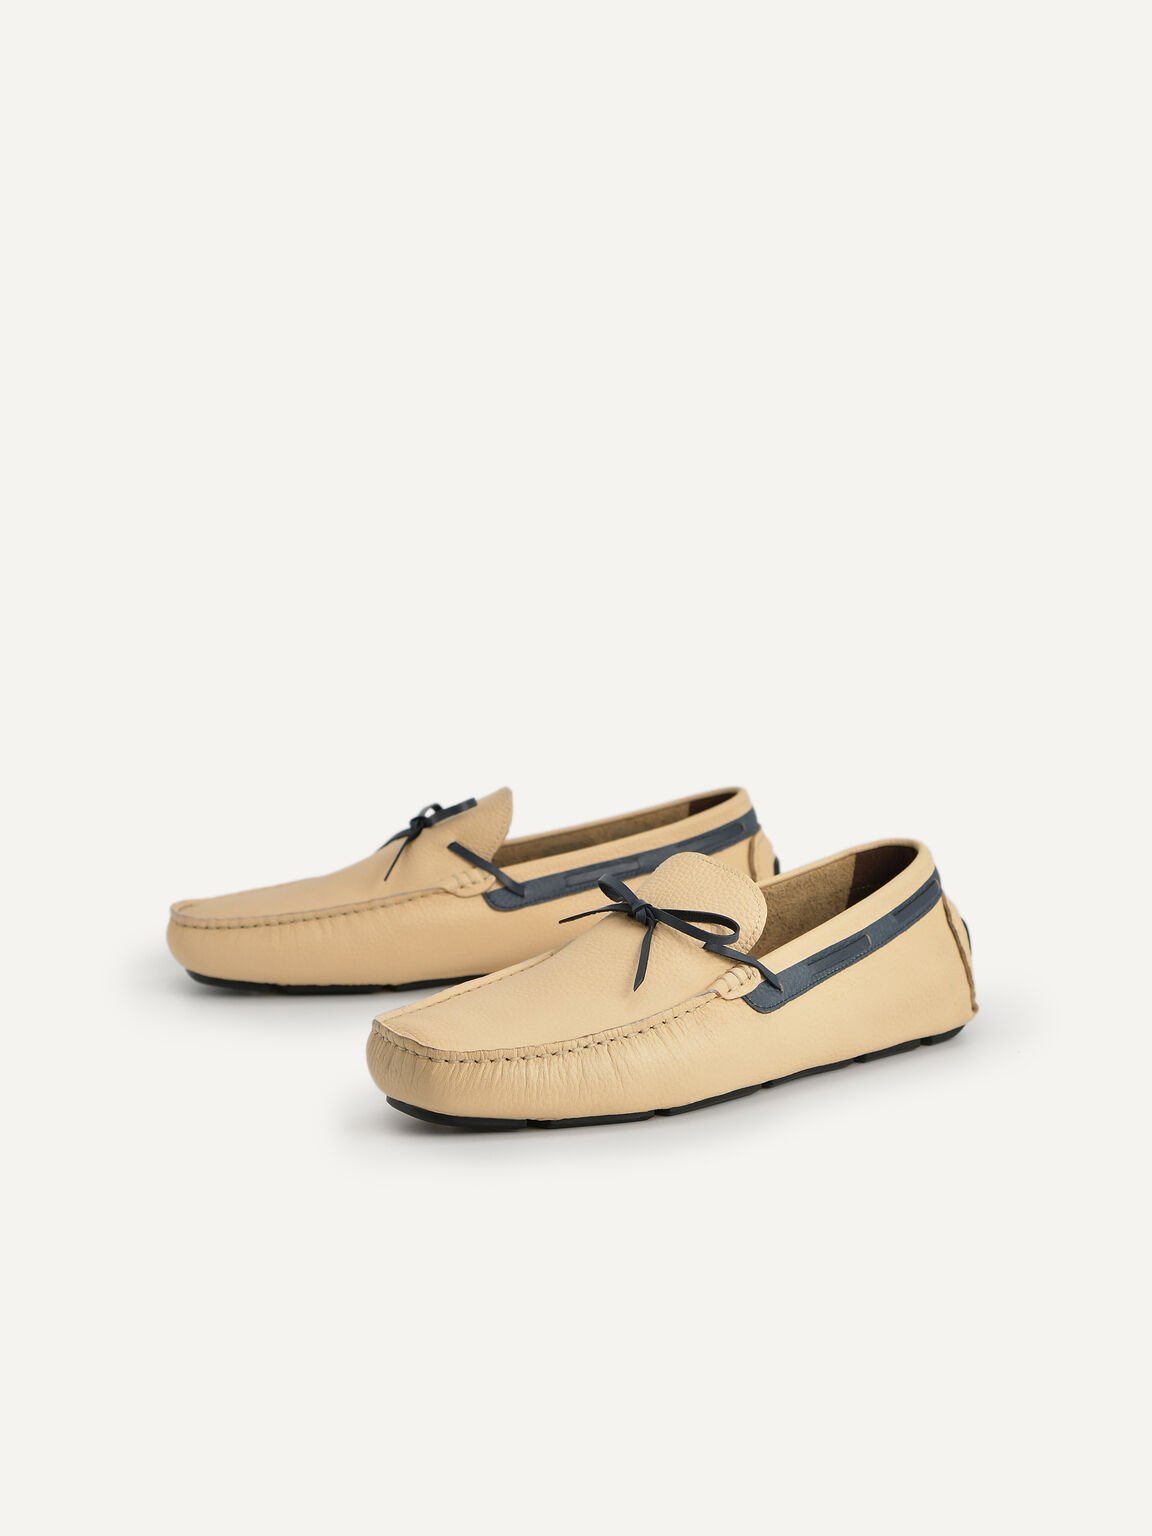 Textured Leather Moccasins with Bow, Beige